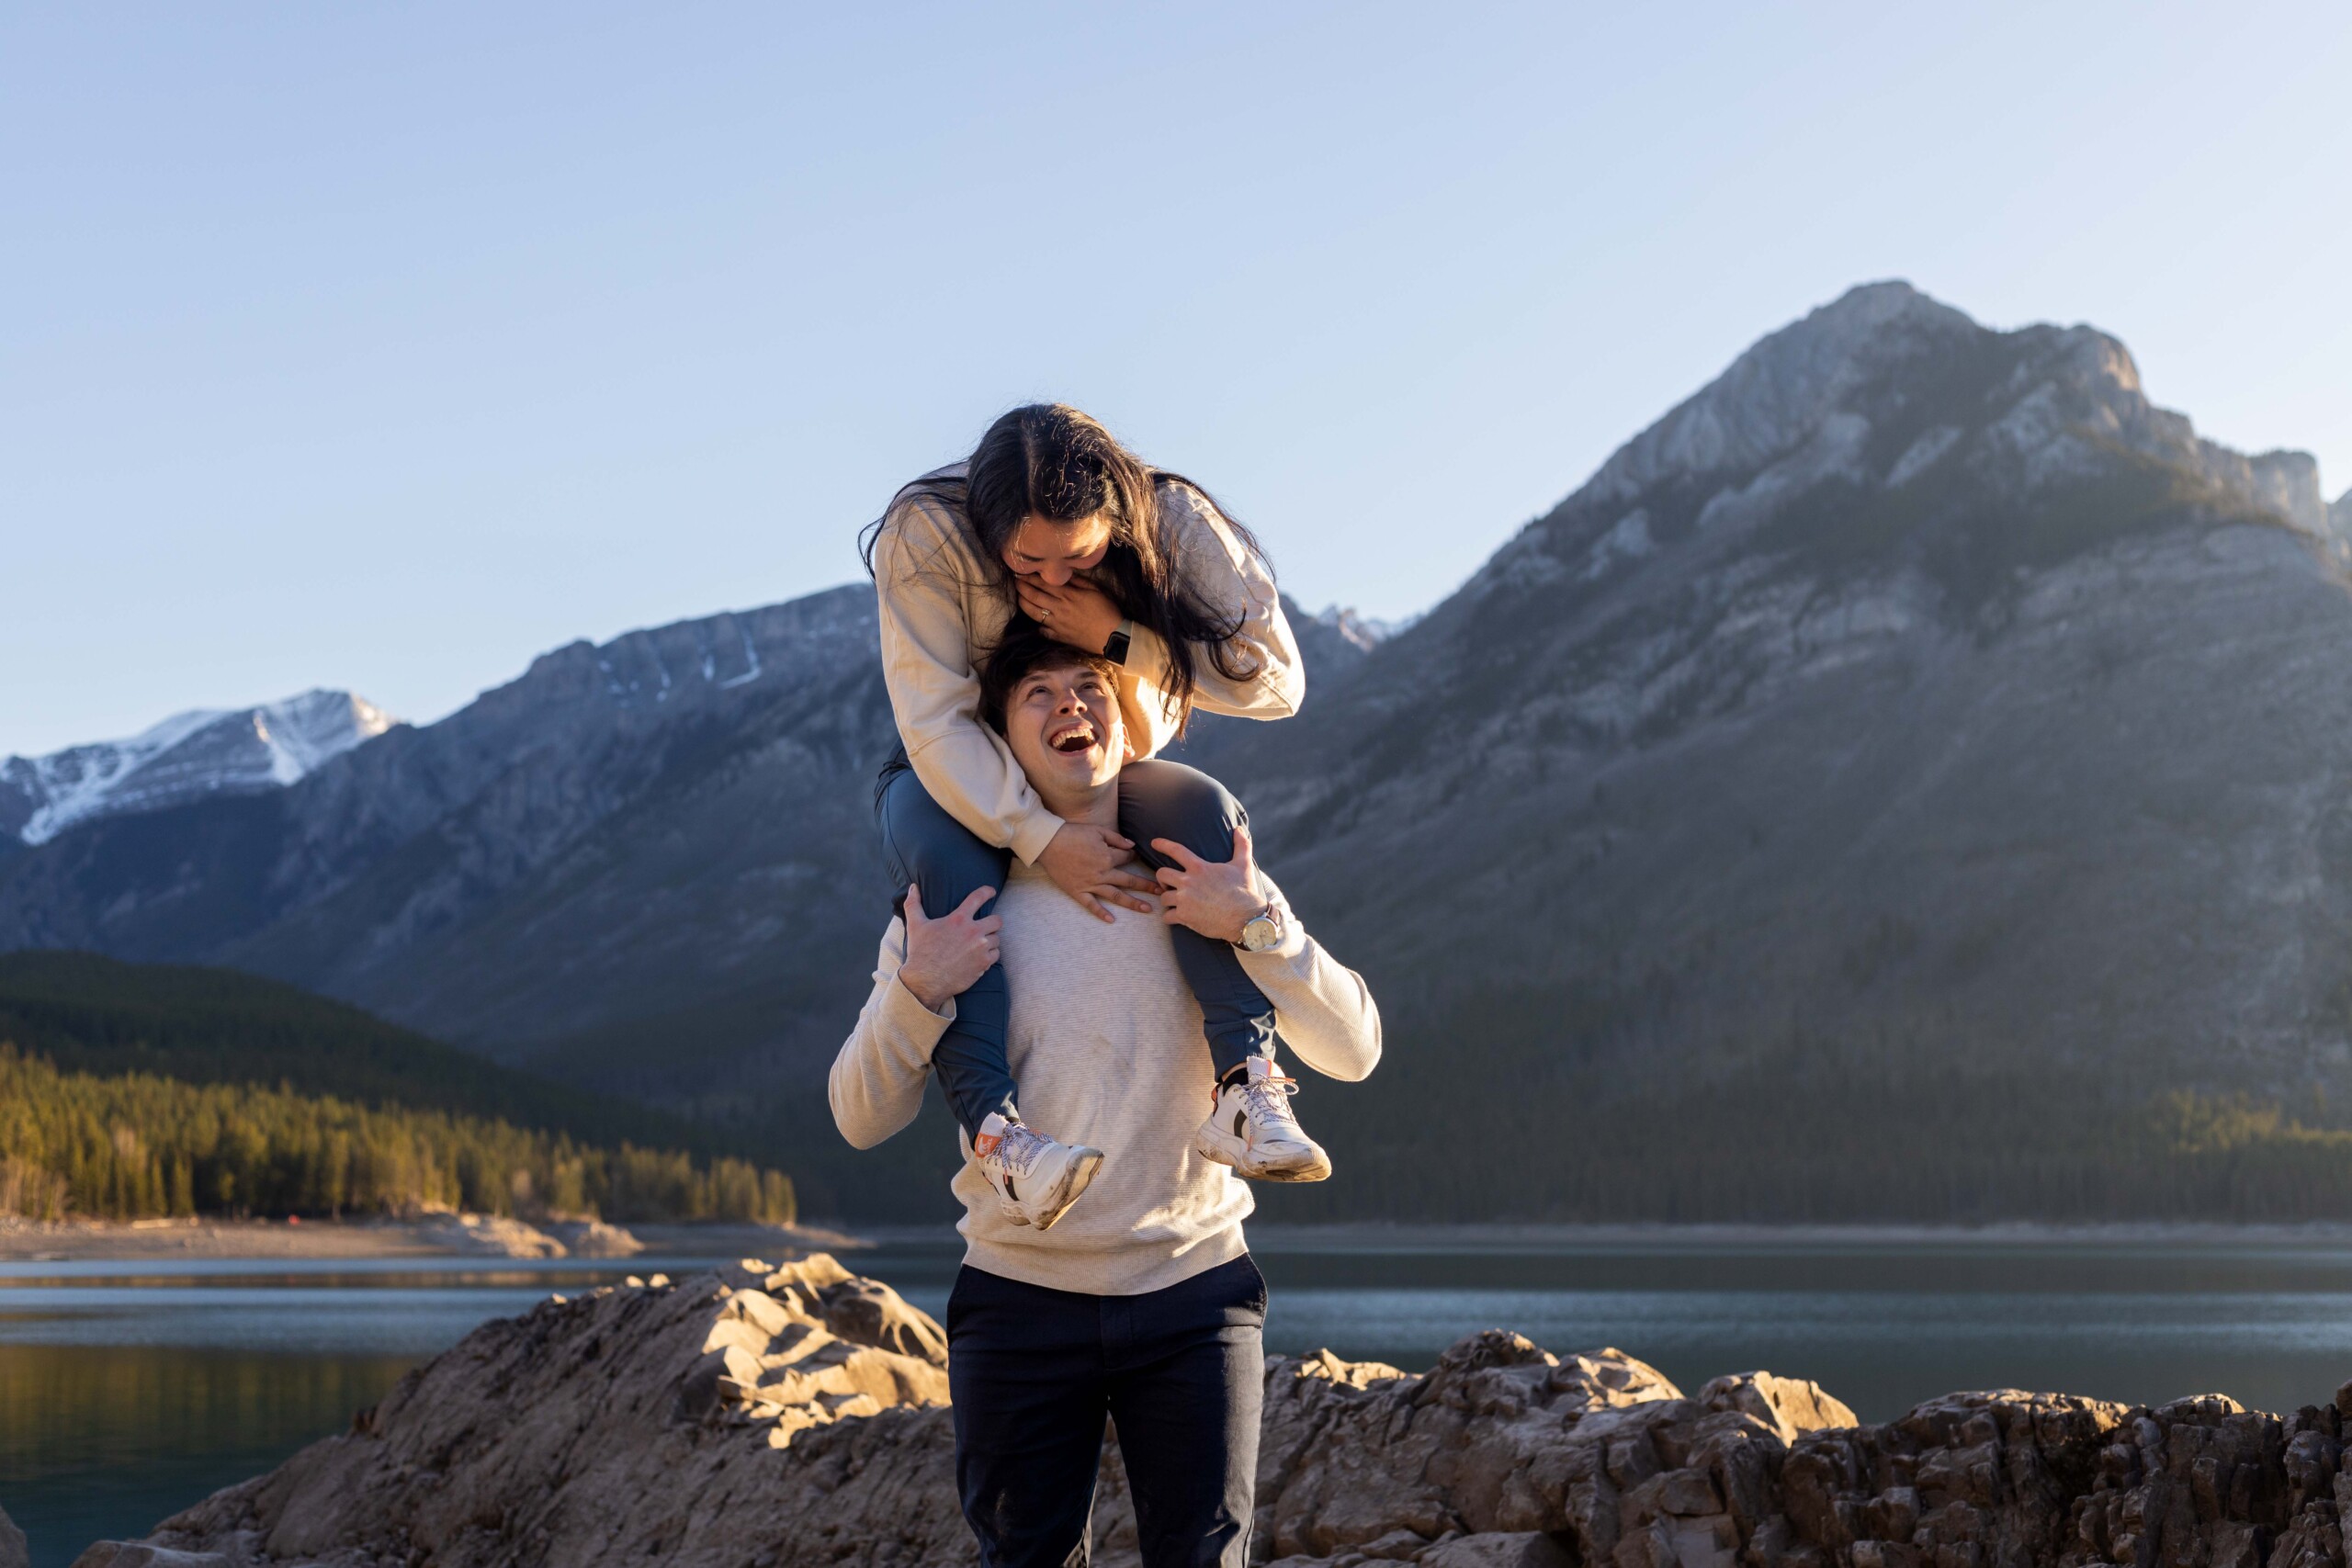 Proposal photoshoot by Solana, Localgrapher in Banff